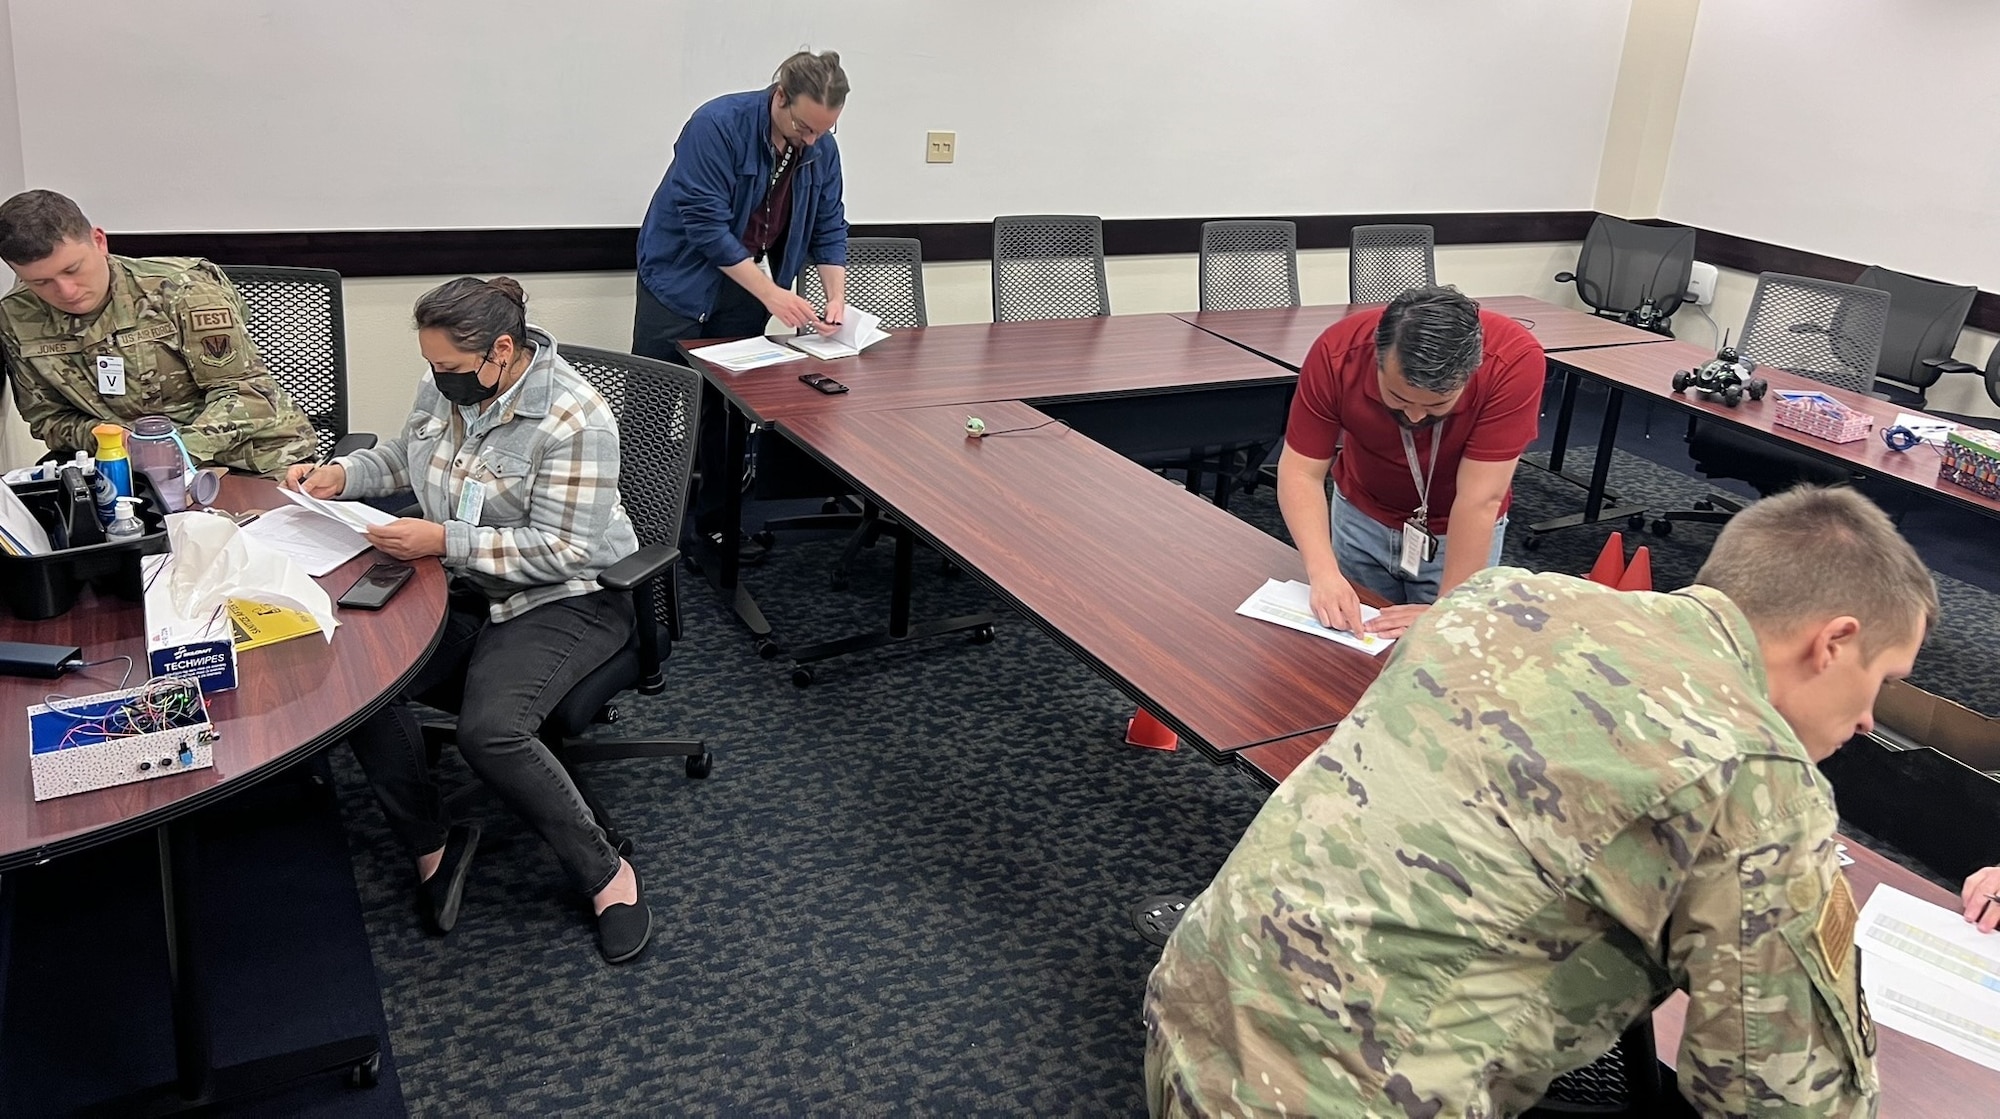 Course instructors review student generated run cards outlining expected test configurations ahead of execution start. These cards outline the starting conditions and required data for collection during a test run.